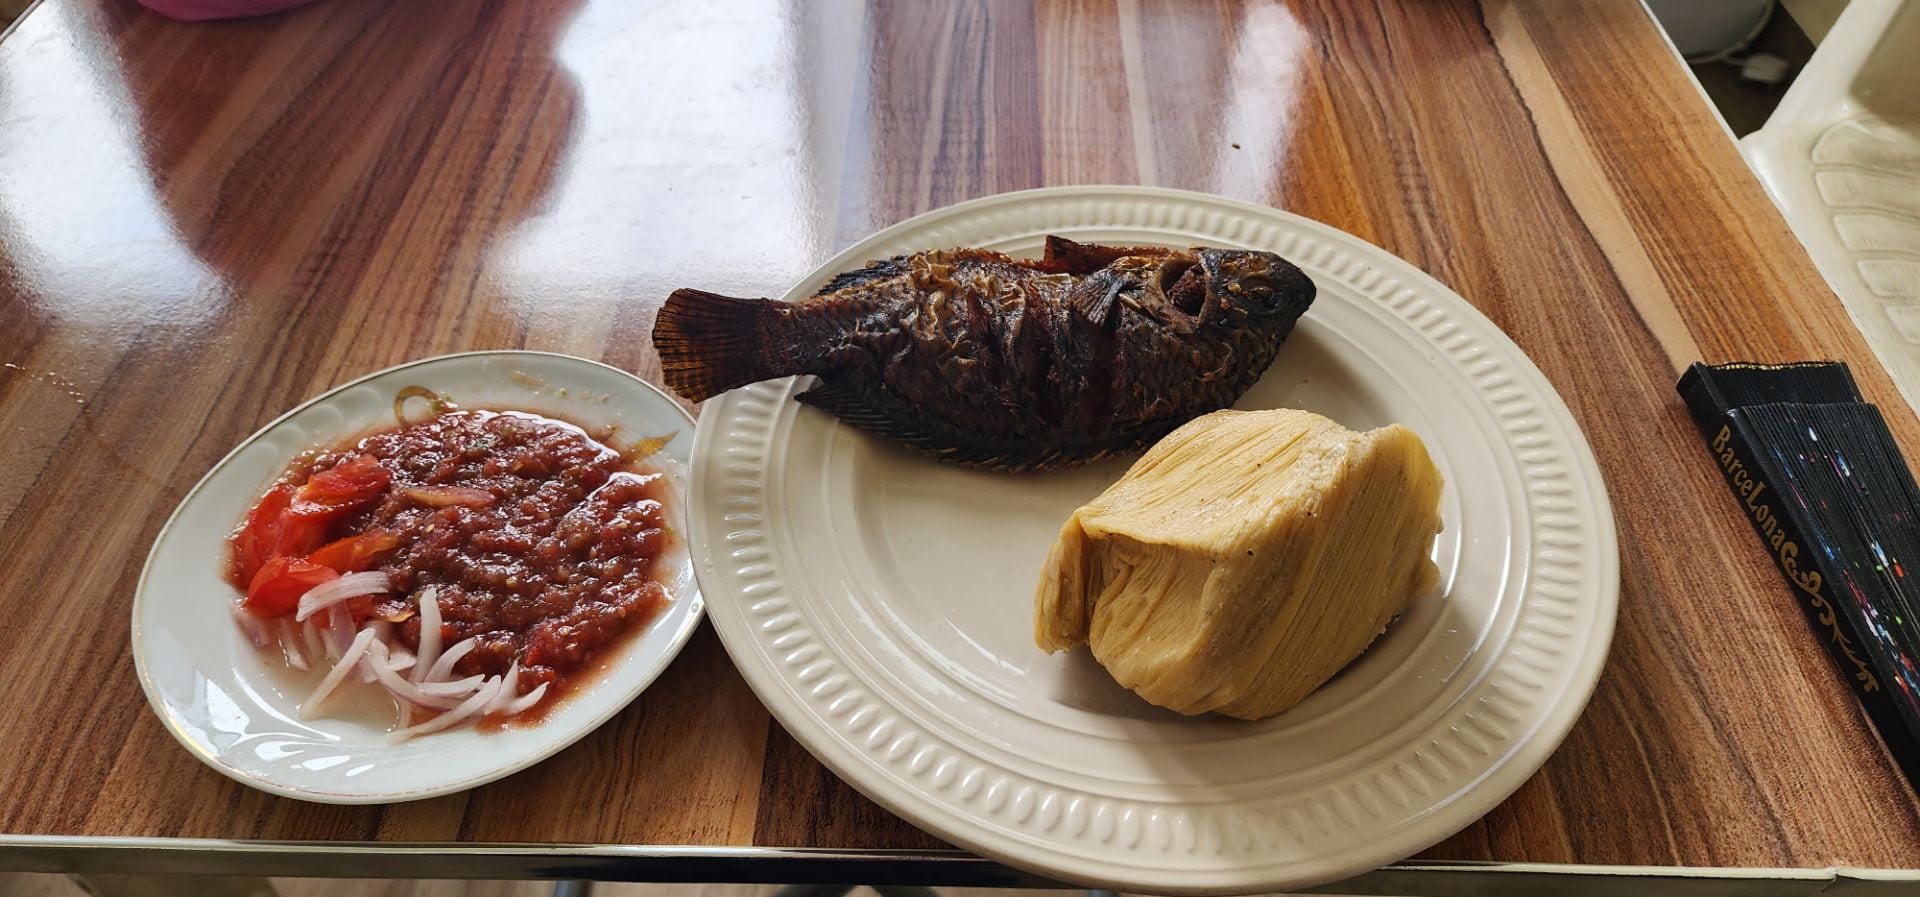 A large plate containing kenkey and a fried tilapia. To the left, a smaller plate containing tomato sauce, onions, and peppers.